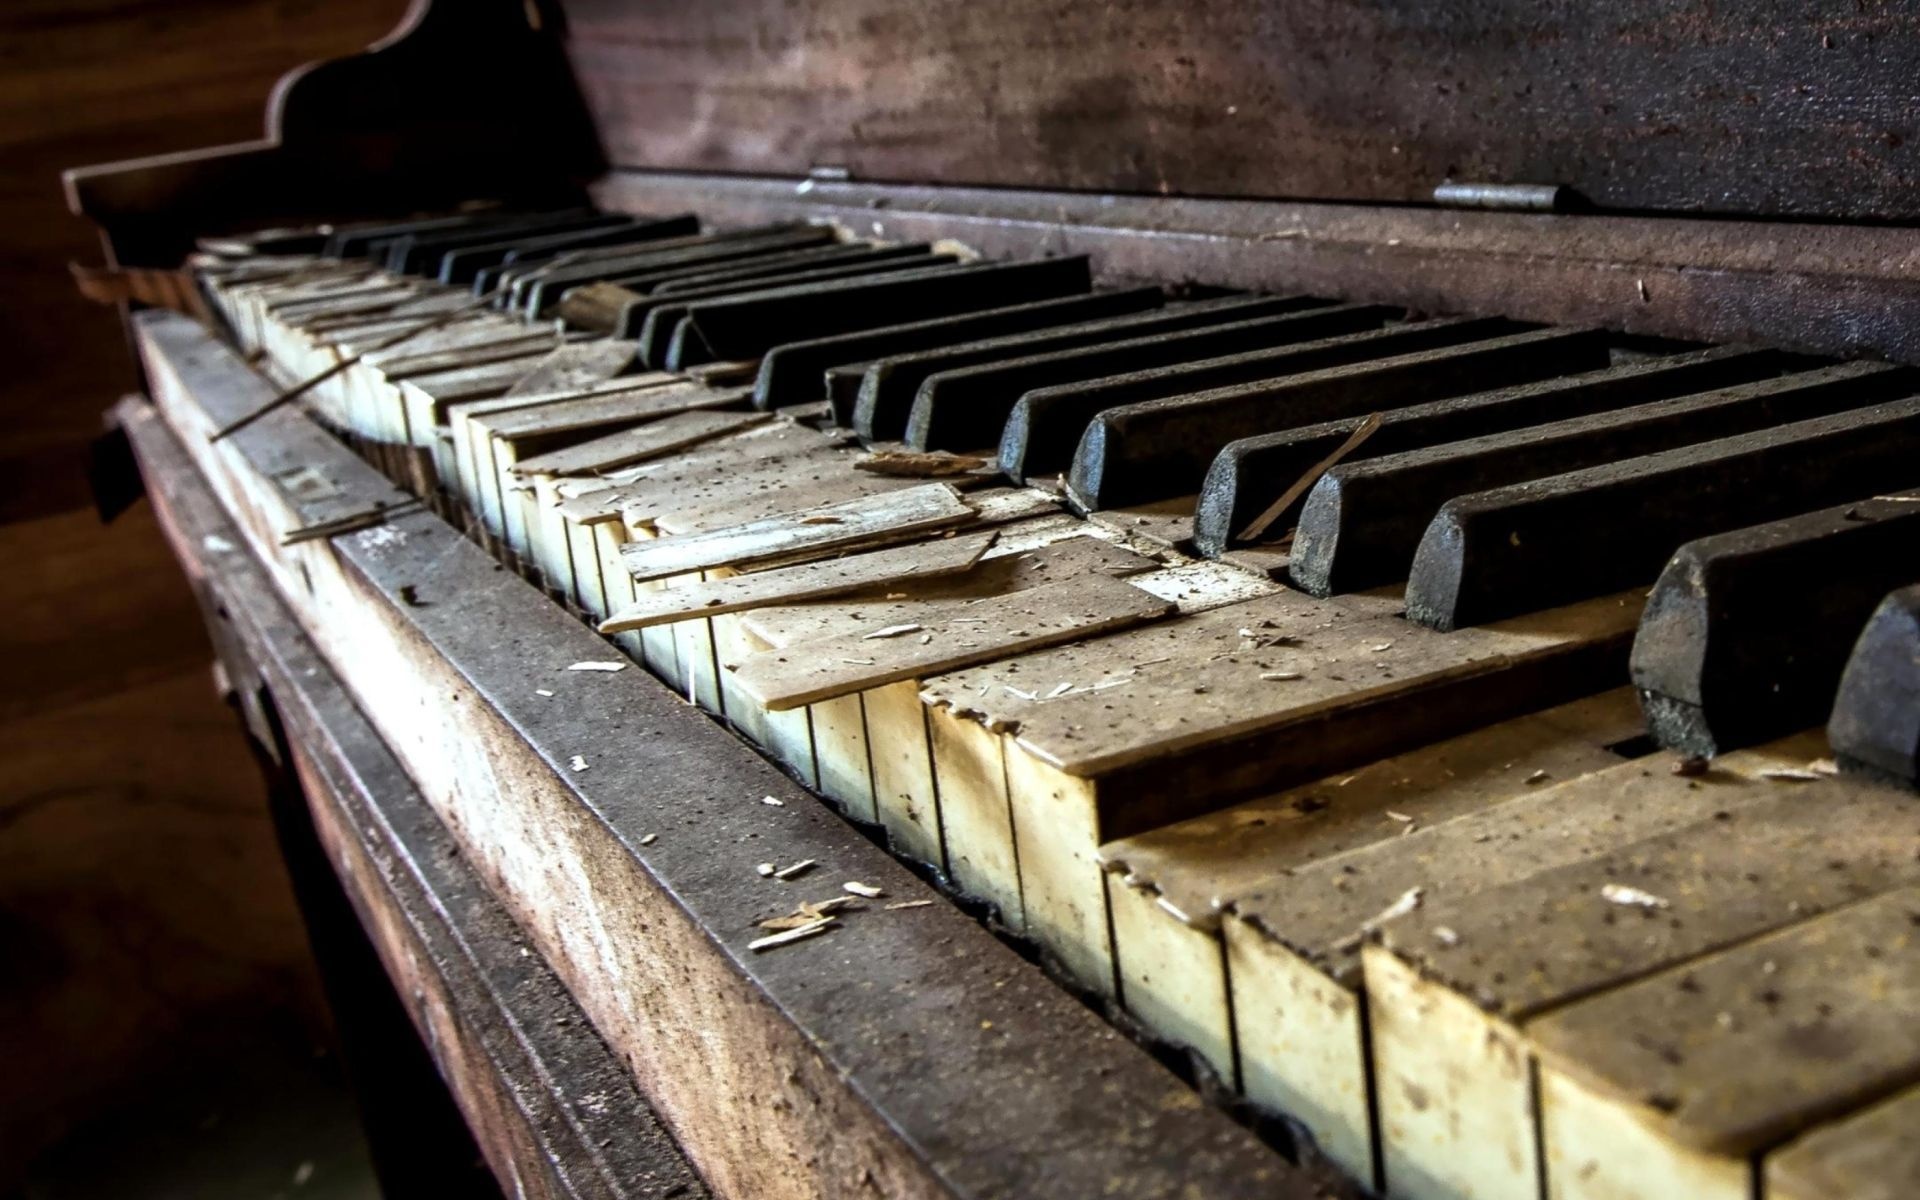 Grand Piano: Abandoned stringed keyboard instrument with a row of 88 black and white keys. 1920x1200 HD Wallpaper.